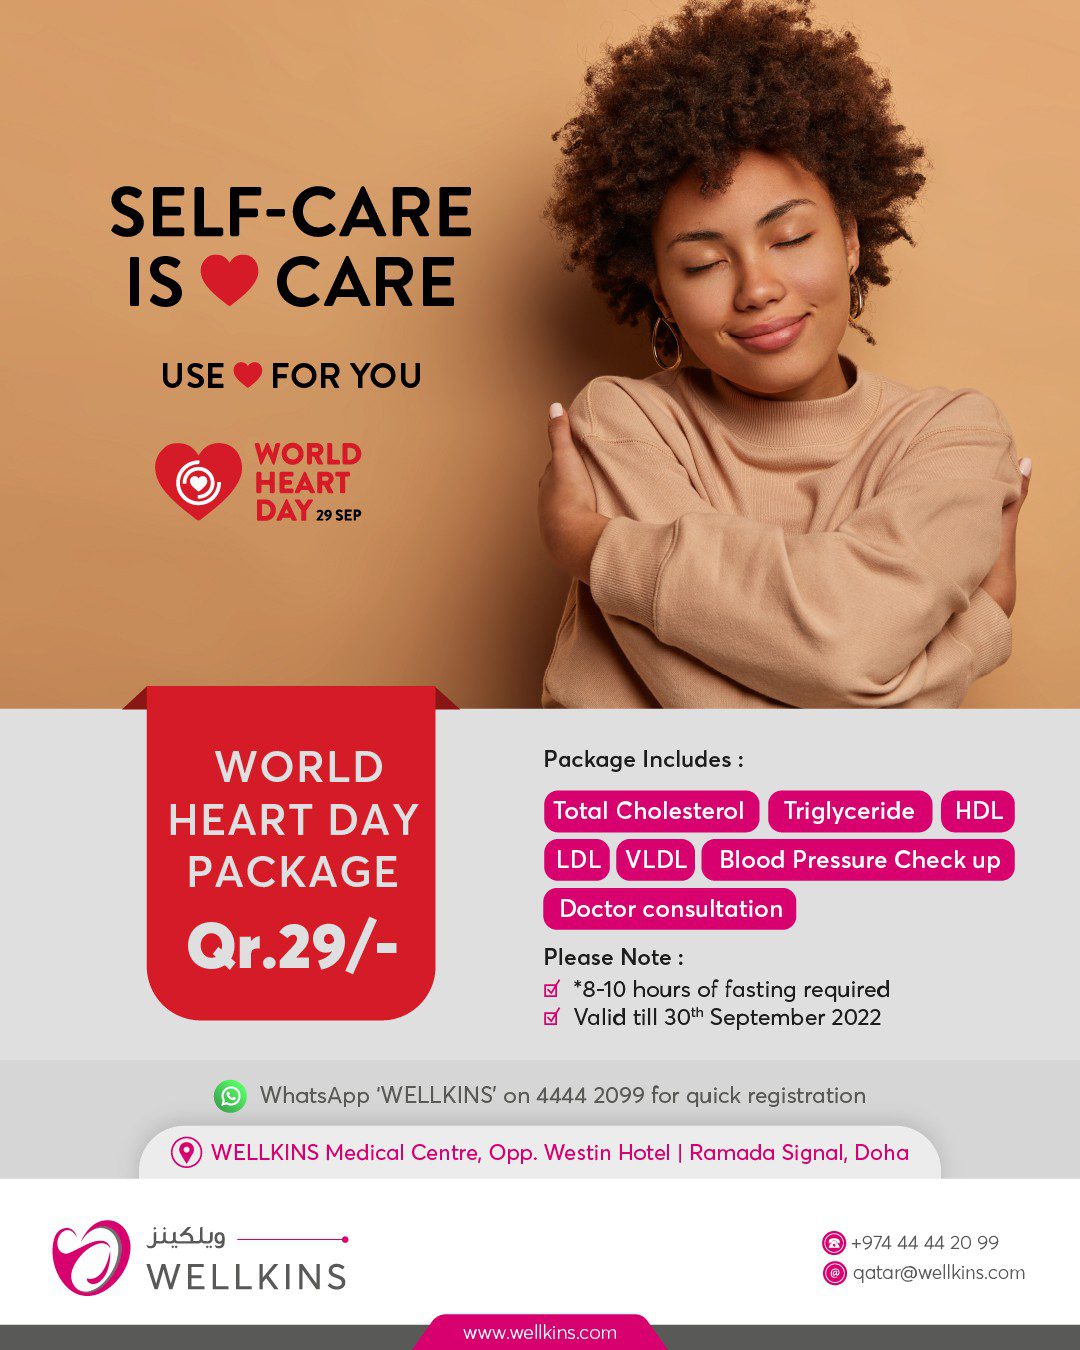 As a part of #WorldHeartDay on September 29th, we are offering special package at Qr.29/-.

Package includes the following tests;
✅Total Cholesterol
✅Triglyceride
✅HDL
✅LDL
✅VLDL
✅Blood Pressure Check up
✅Doctor consultation 

*8-10 hours of fasting required
Valid till 30th September 2022

Register here to get the package at Qr.29/- : https://wellkins.com/world-heart-day/
_______________________________
To learn more about #WELLKINSQATAR and our services, kindly visit our website www.wellkins.com
Helpline: 4444 2099 
_______________________________
#healthyheart #useheart #worldheartday #Wellkinsqatar #wellkins #medicalcentre